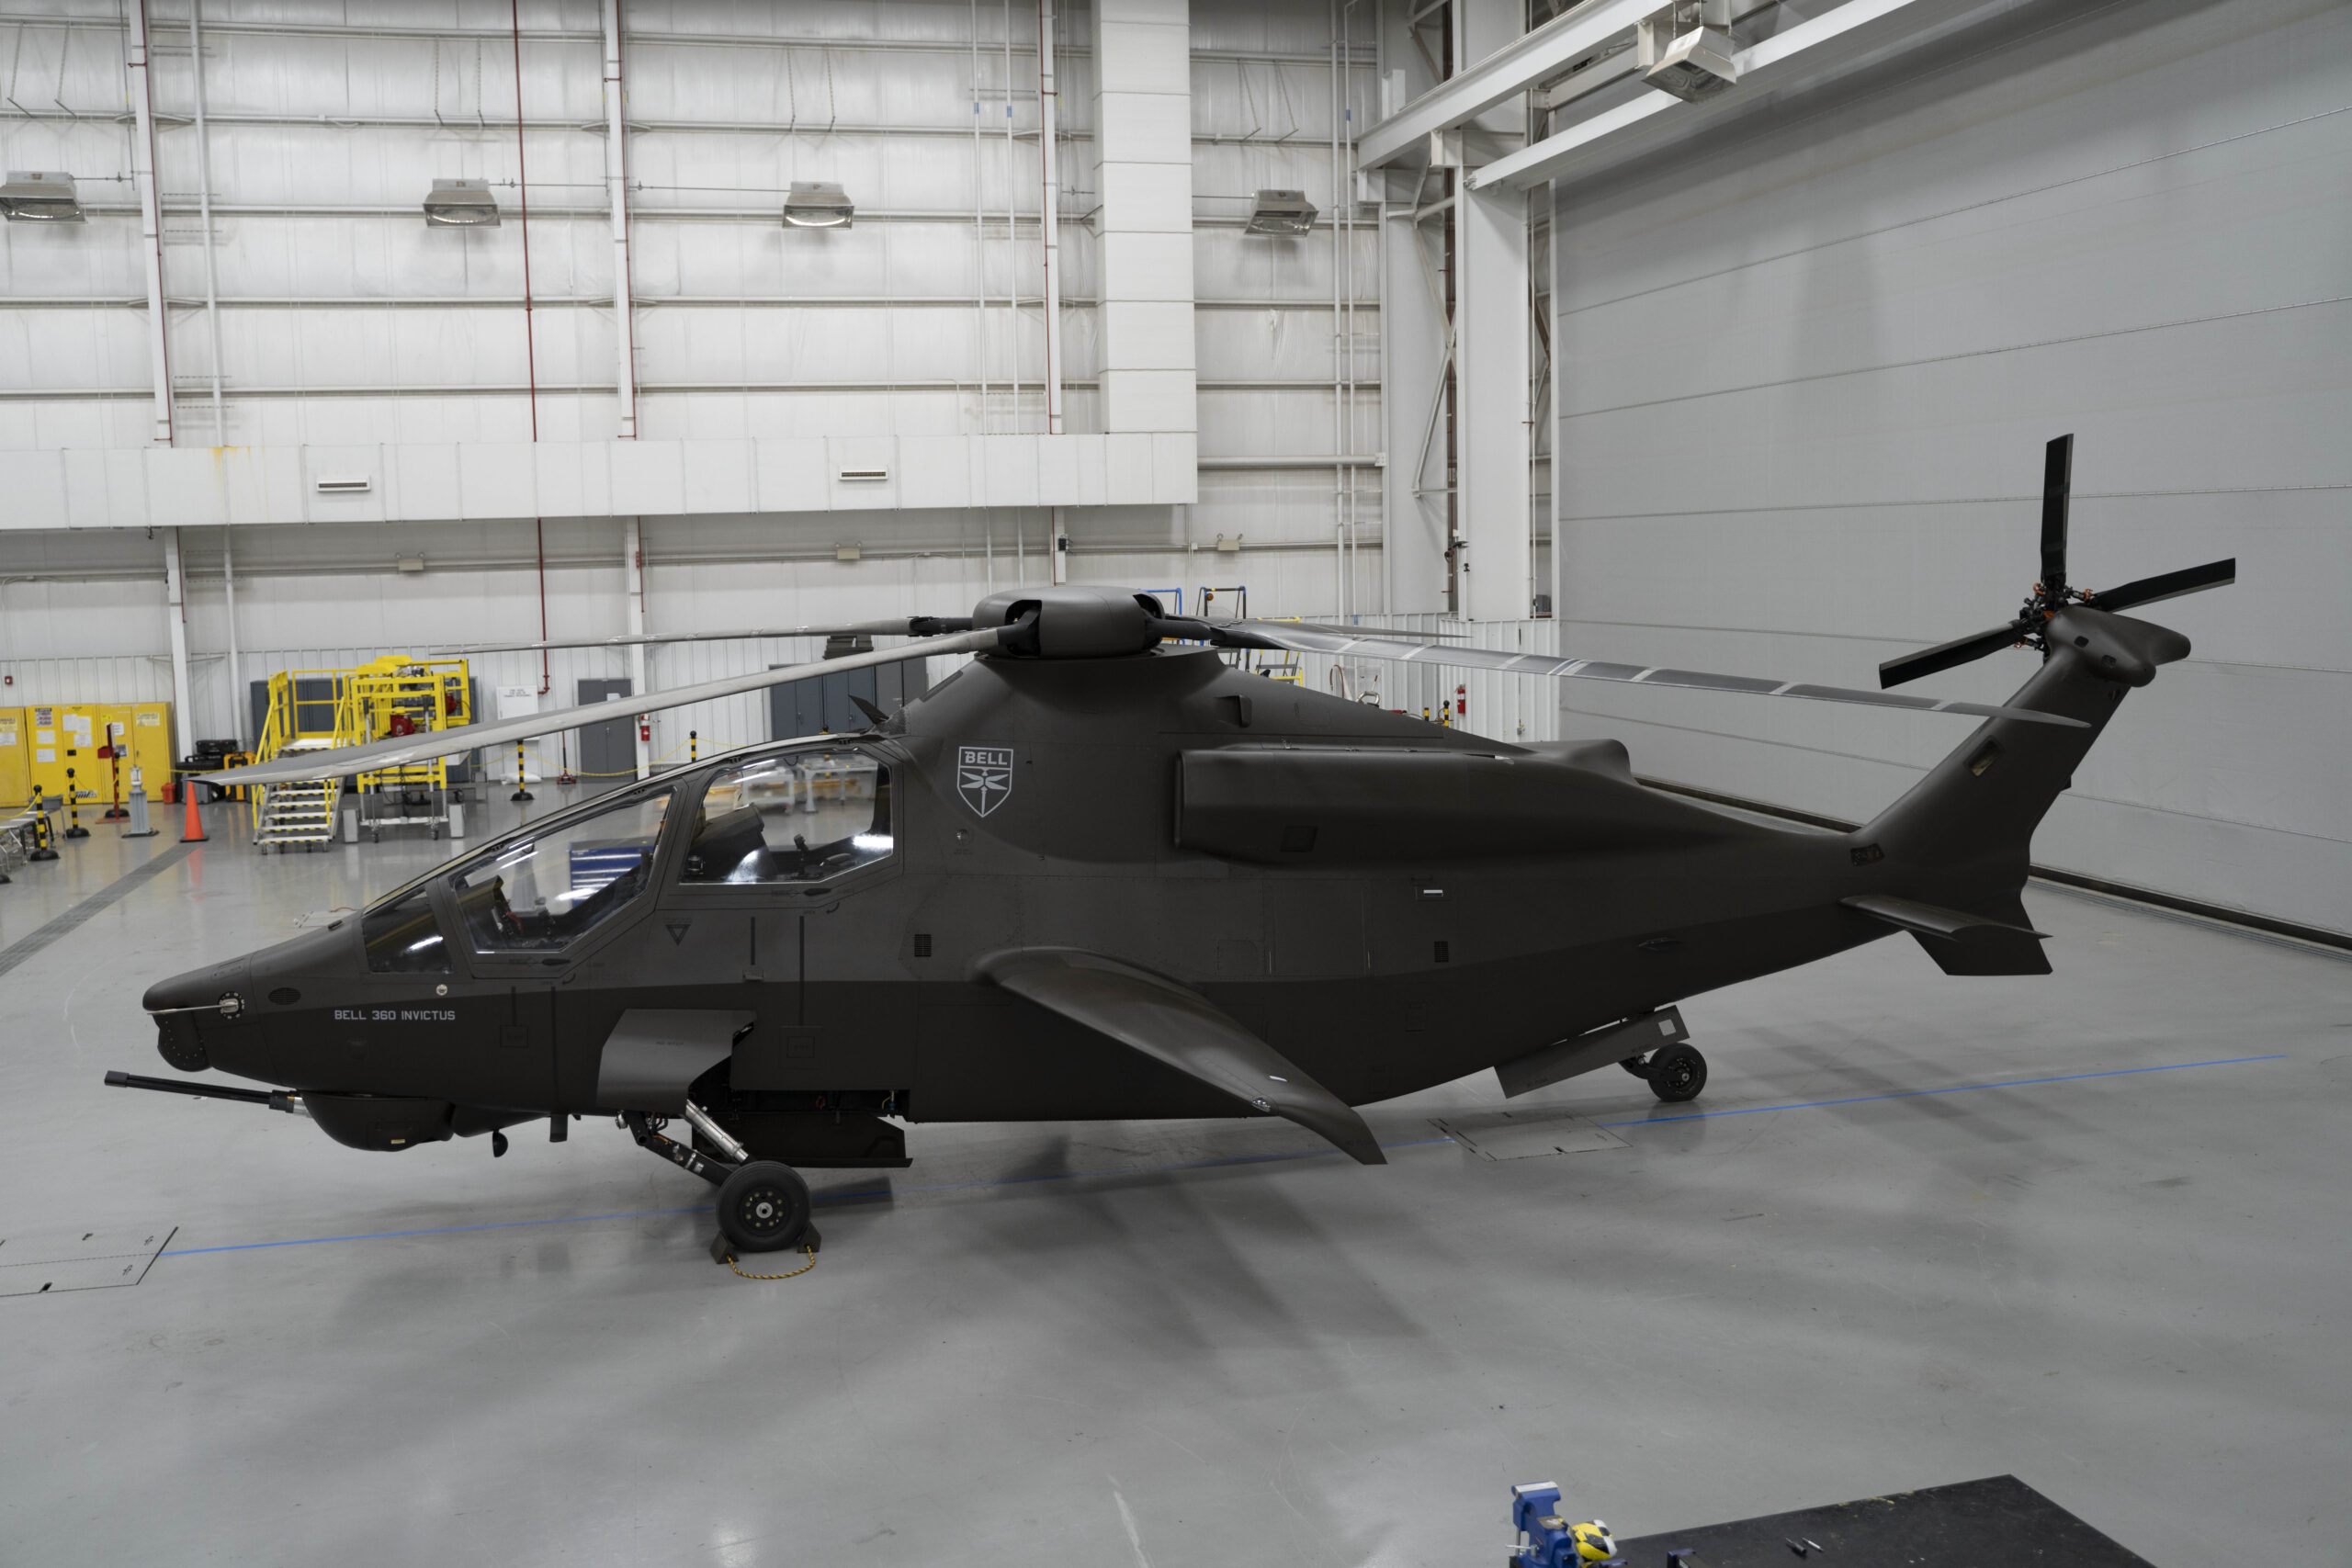 Third parties will be able to plug and play their capabilities onto the Bell 360 Invictus for the Army’s FARA program, enabling competition and affordability. (FARA photo by Bell Textron.)